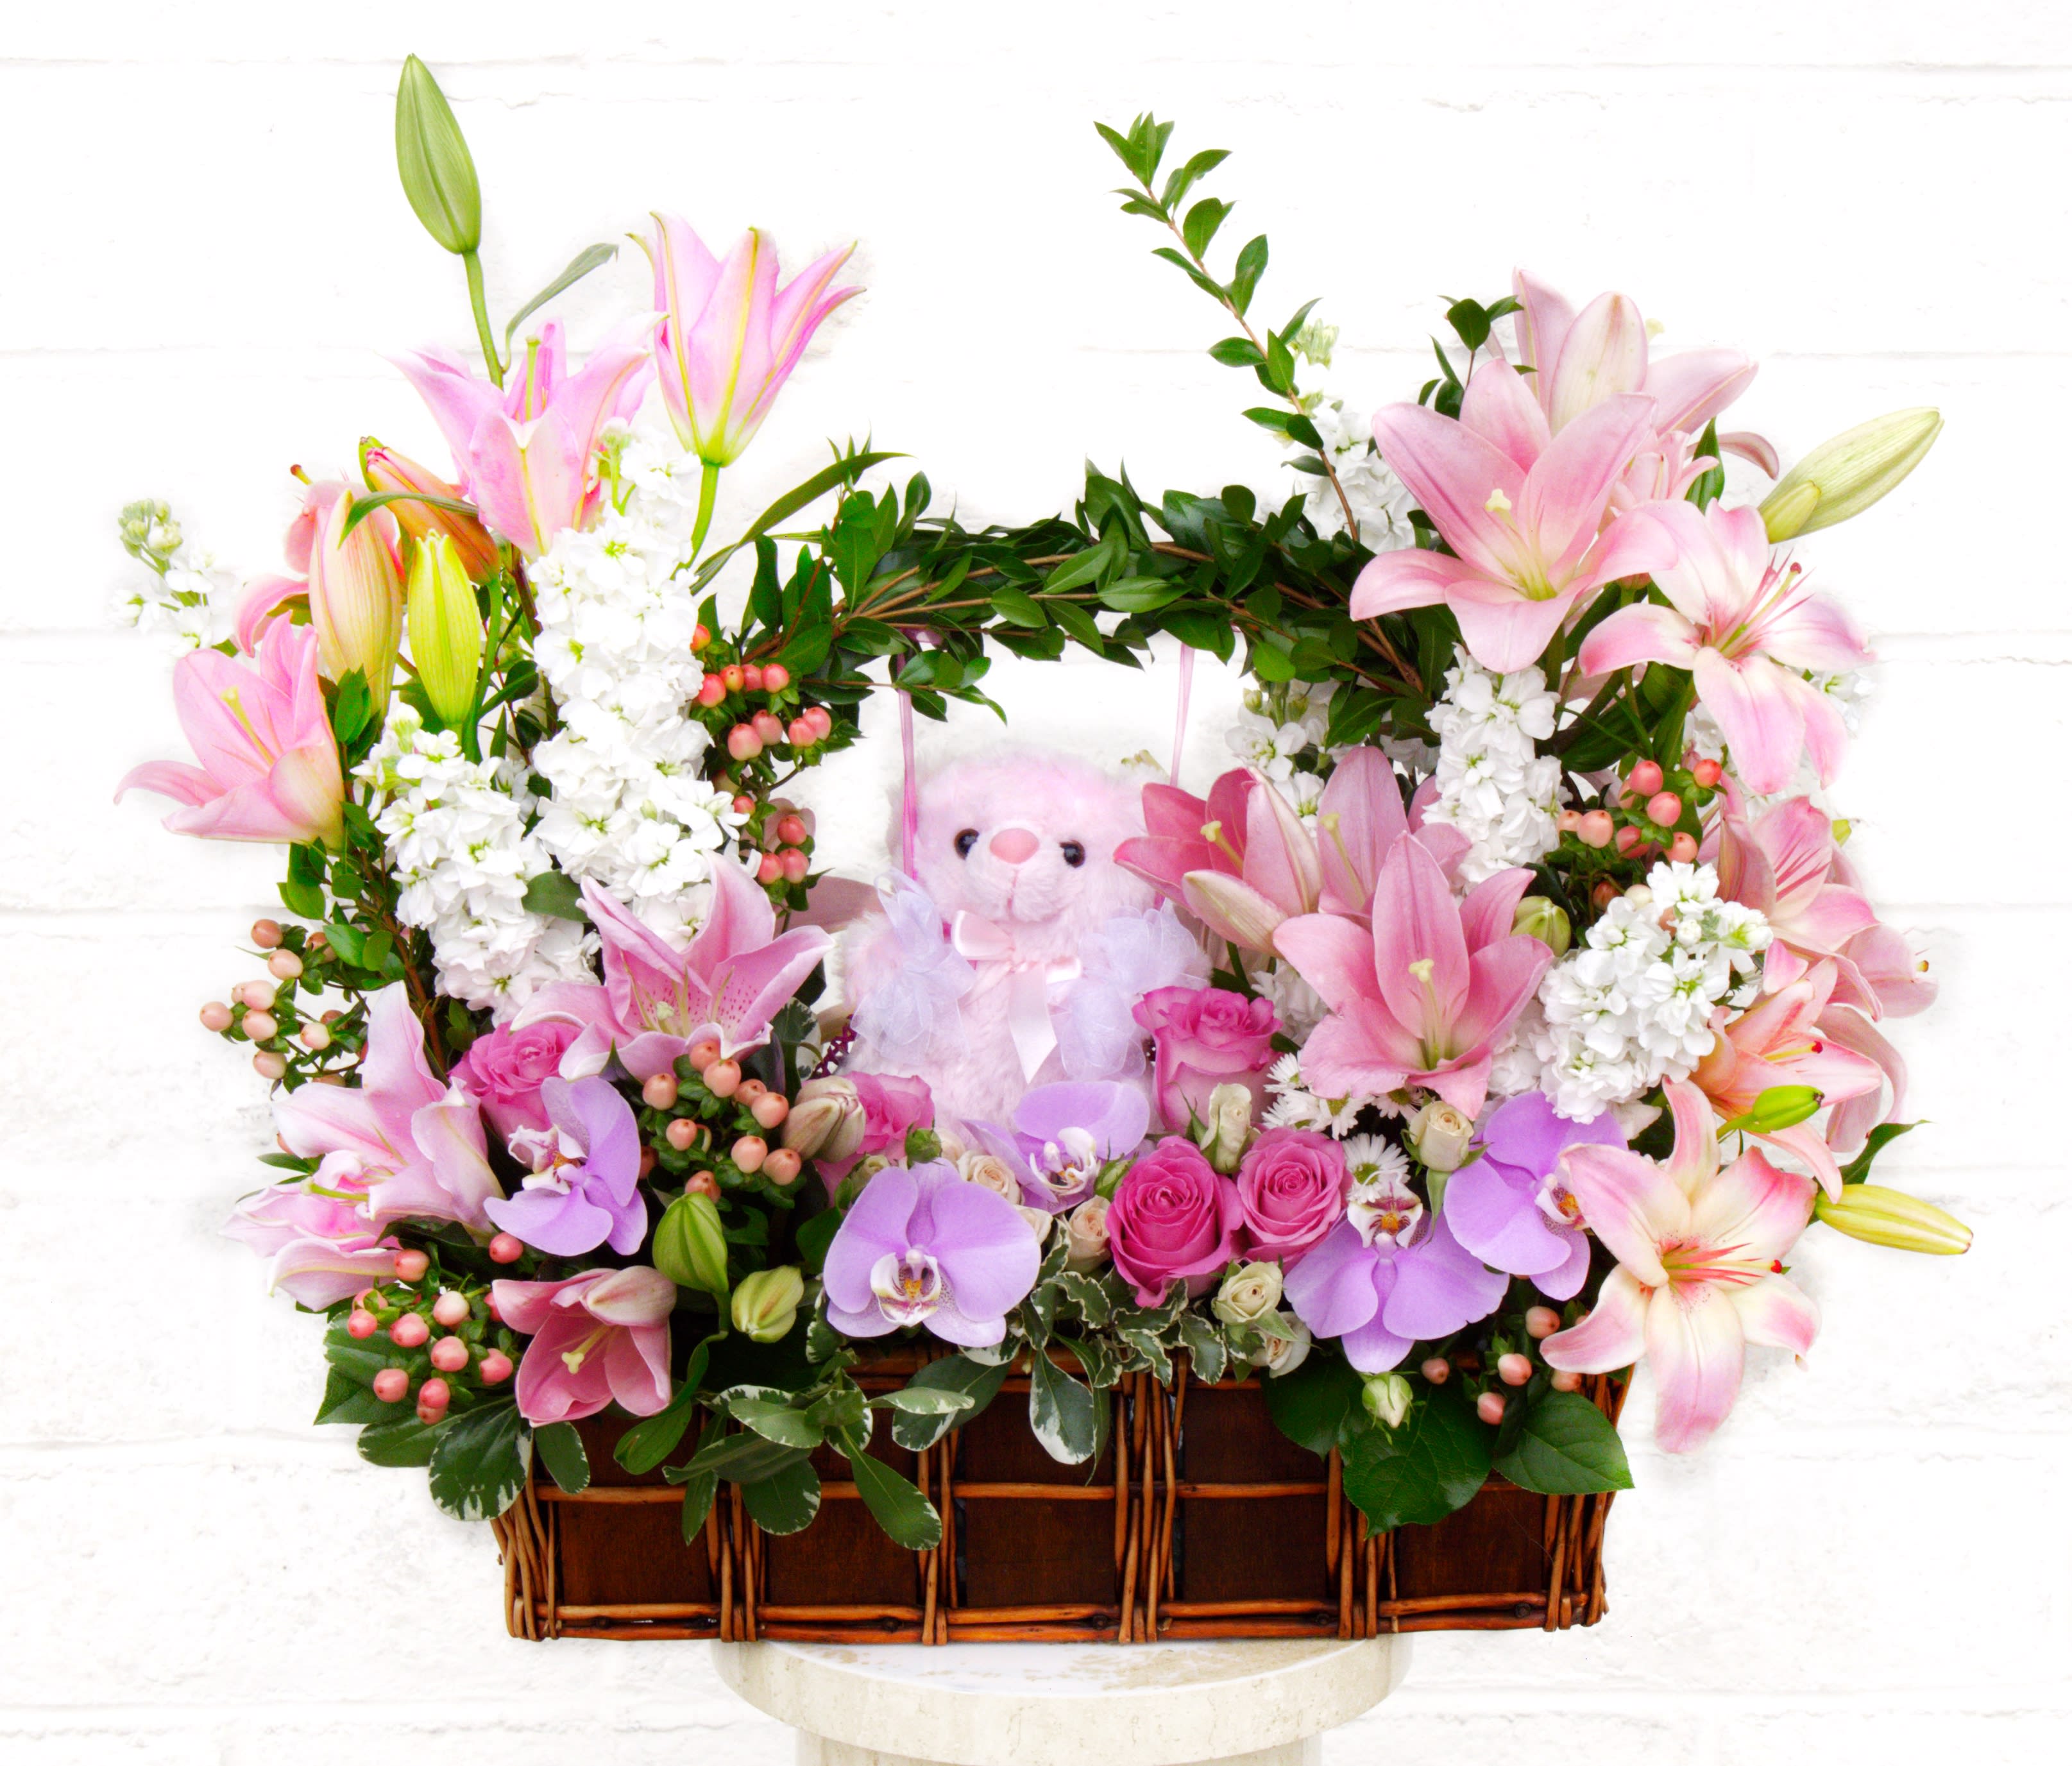 Beary Wonderland - Beautiful design including all premium flowers in white and pink and a cute Teddy bear. STANDARD: FIRST PHOTO DELUXE: SECOND PHOTO PREMIUM: THIRD PHOTO